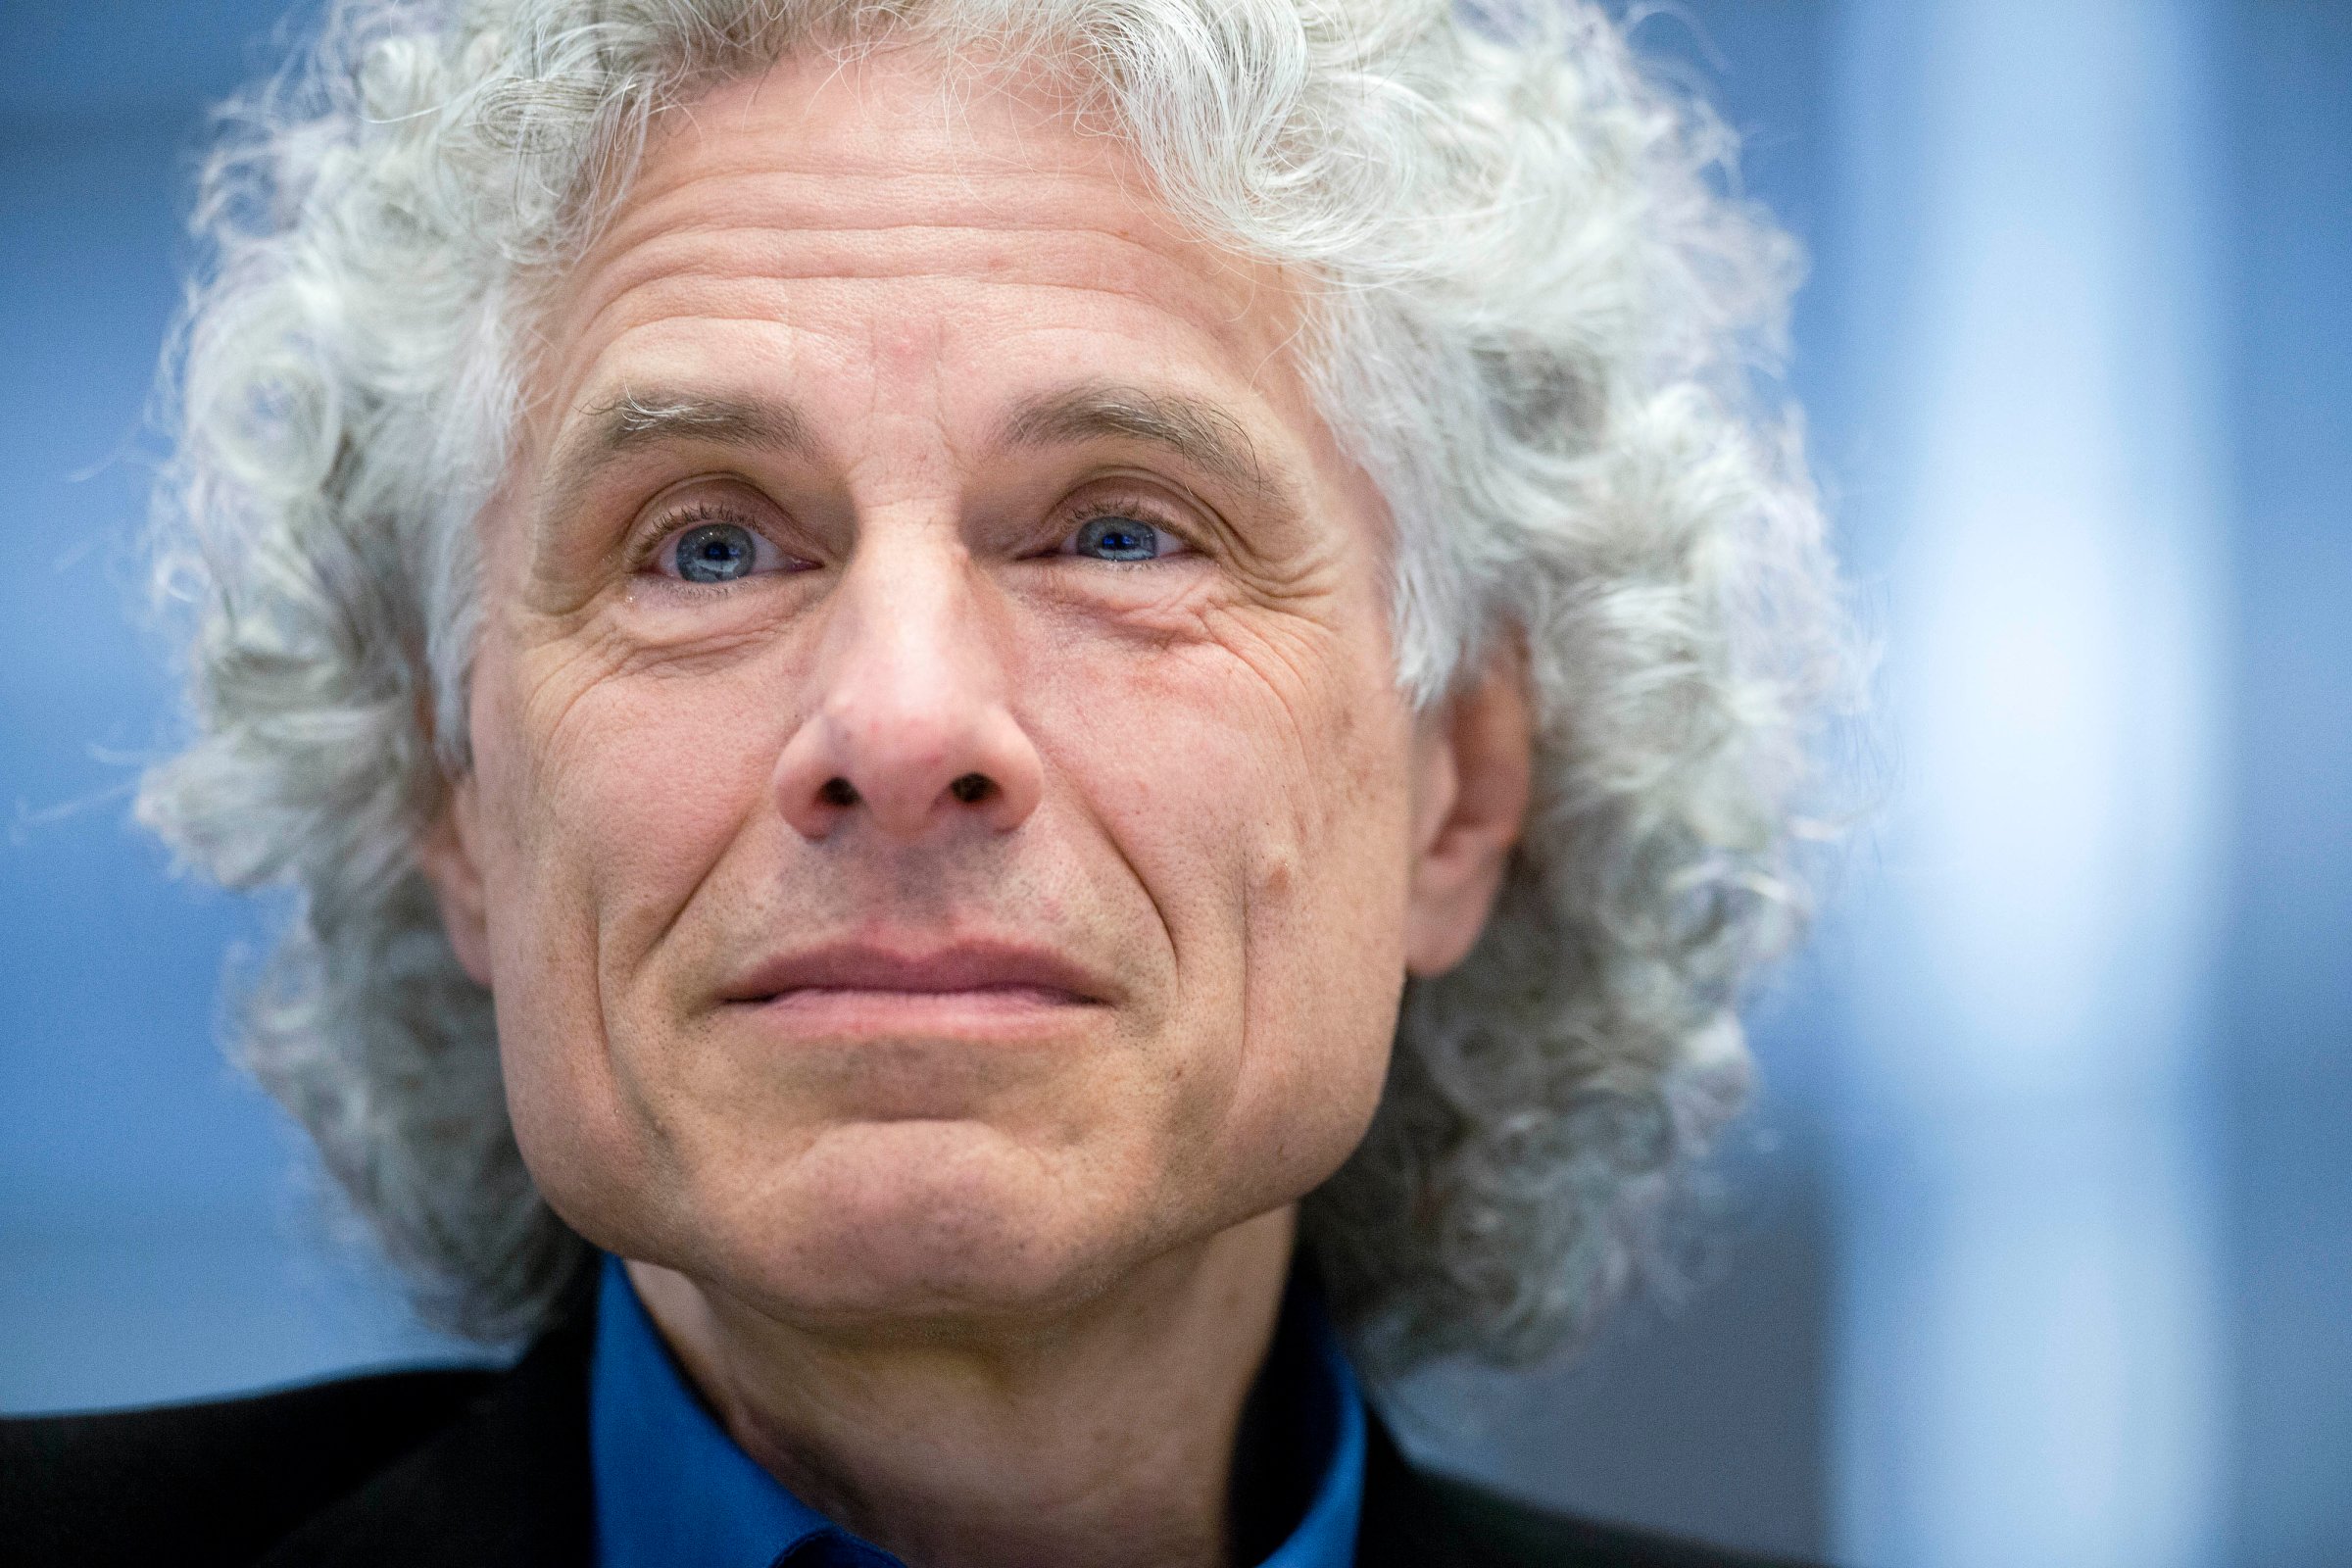 Steven Pinker during an interview in New York City on May 22, 2015.